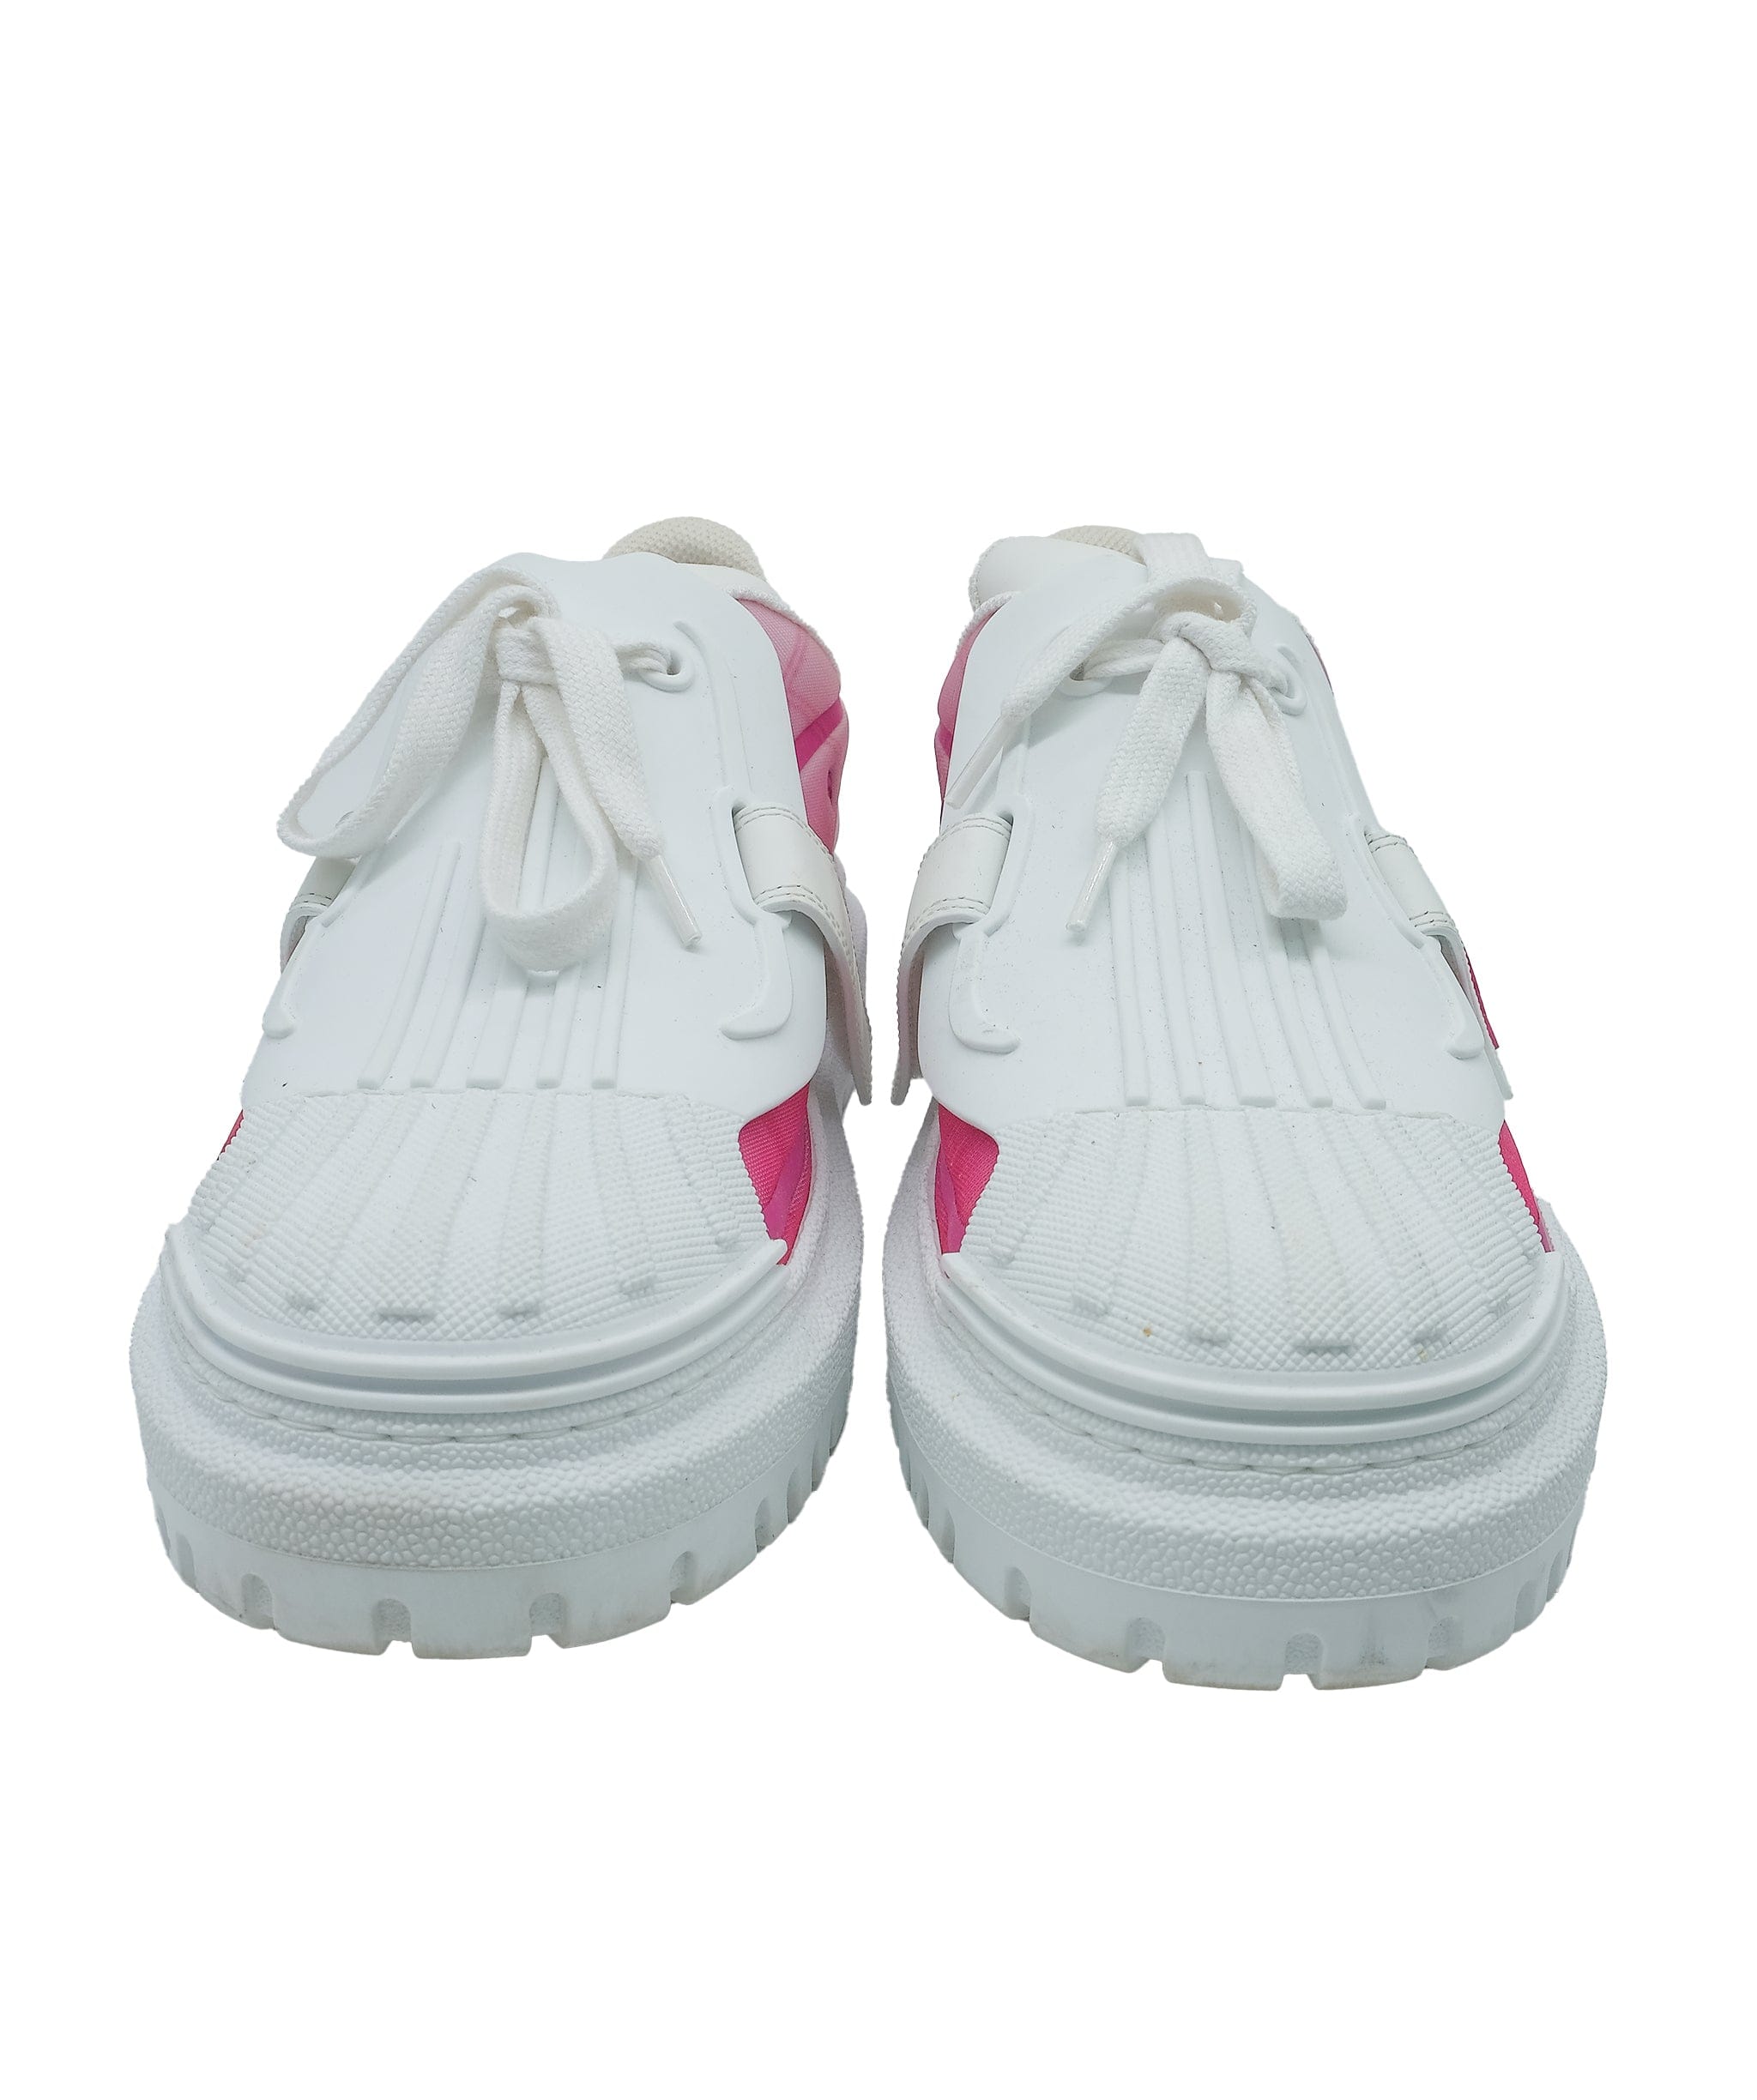 Christian Dior Christian dior traines Pink and white RJC3189